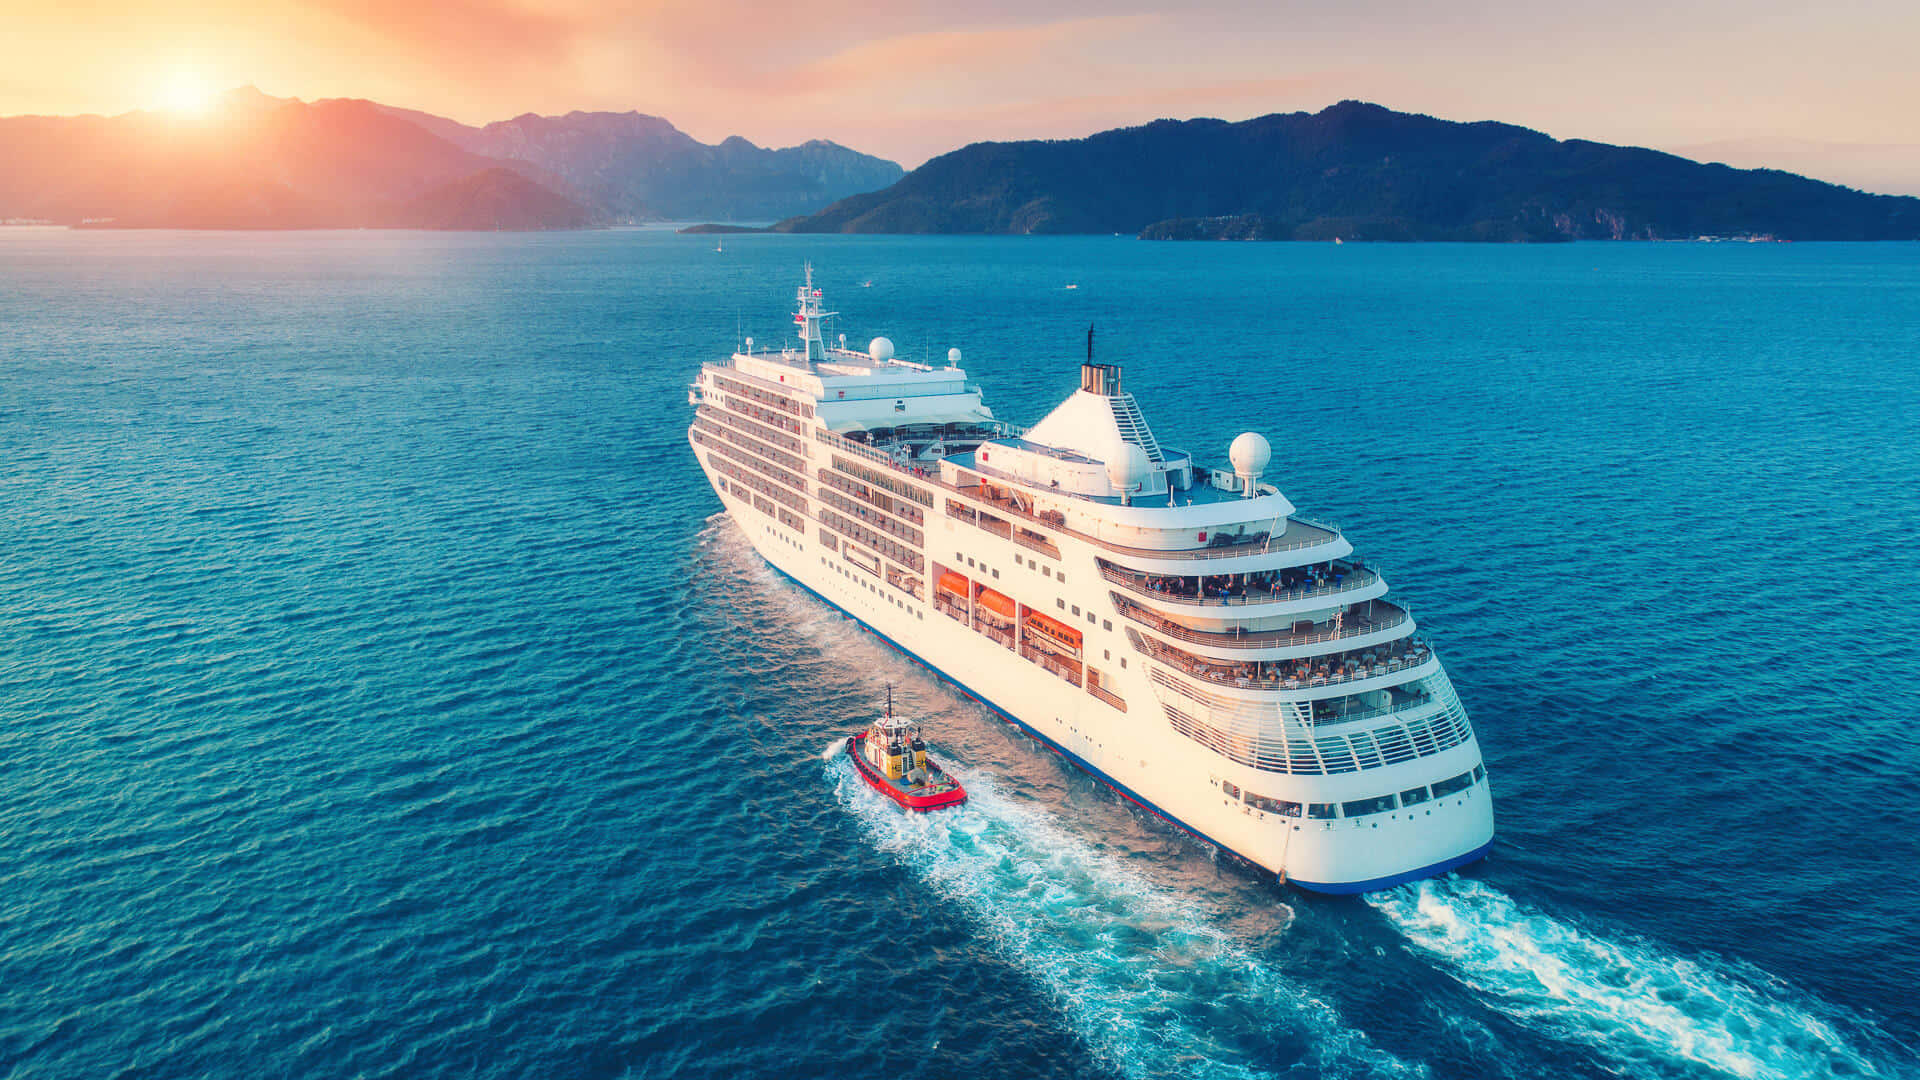 Enjoy the Perfect Cruise on This Dreamy Ship